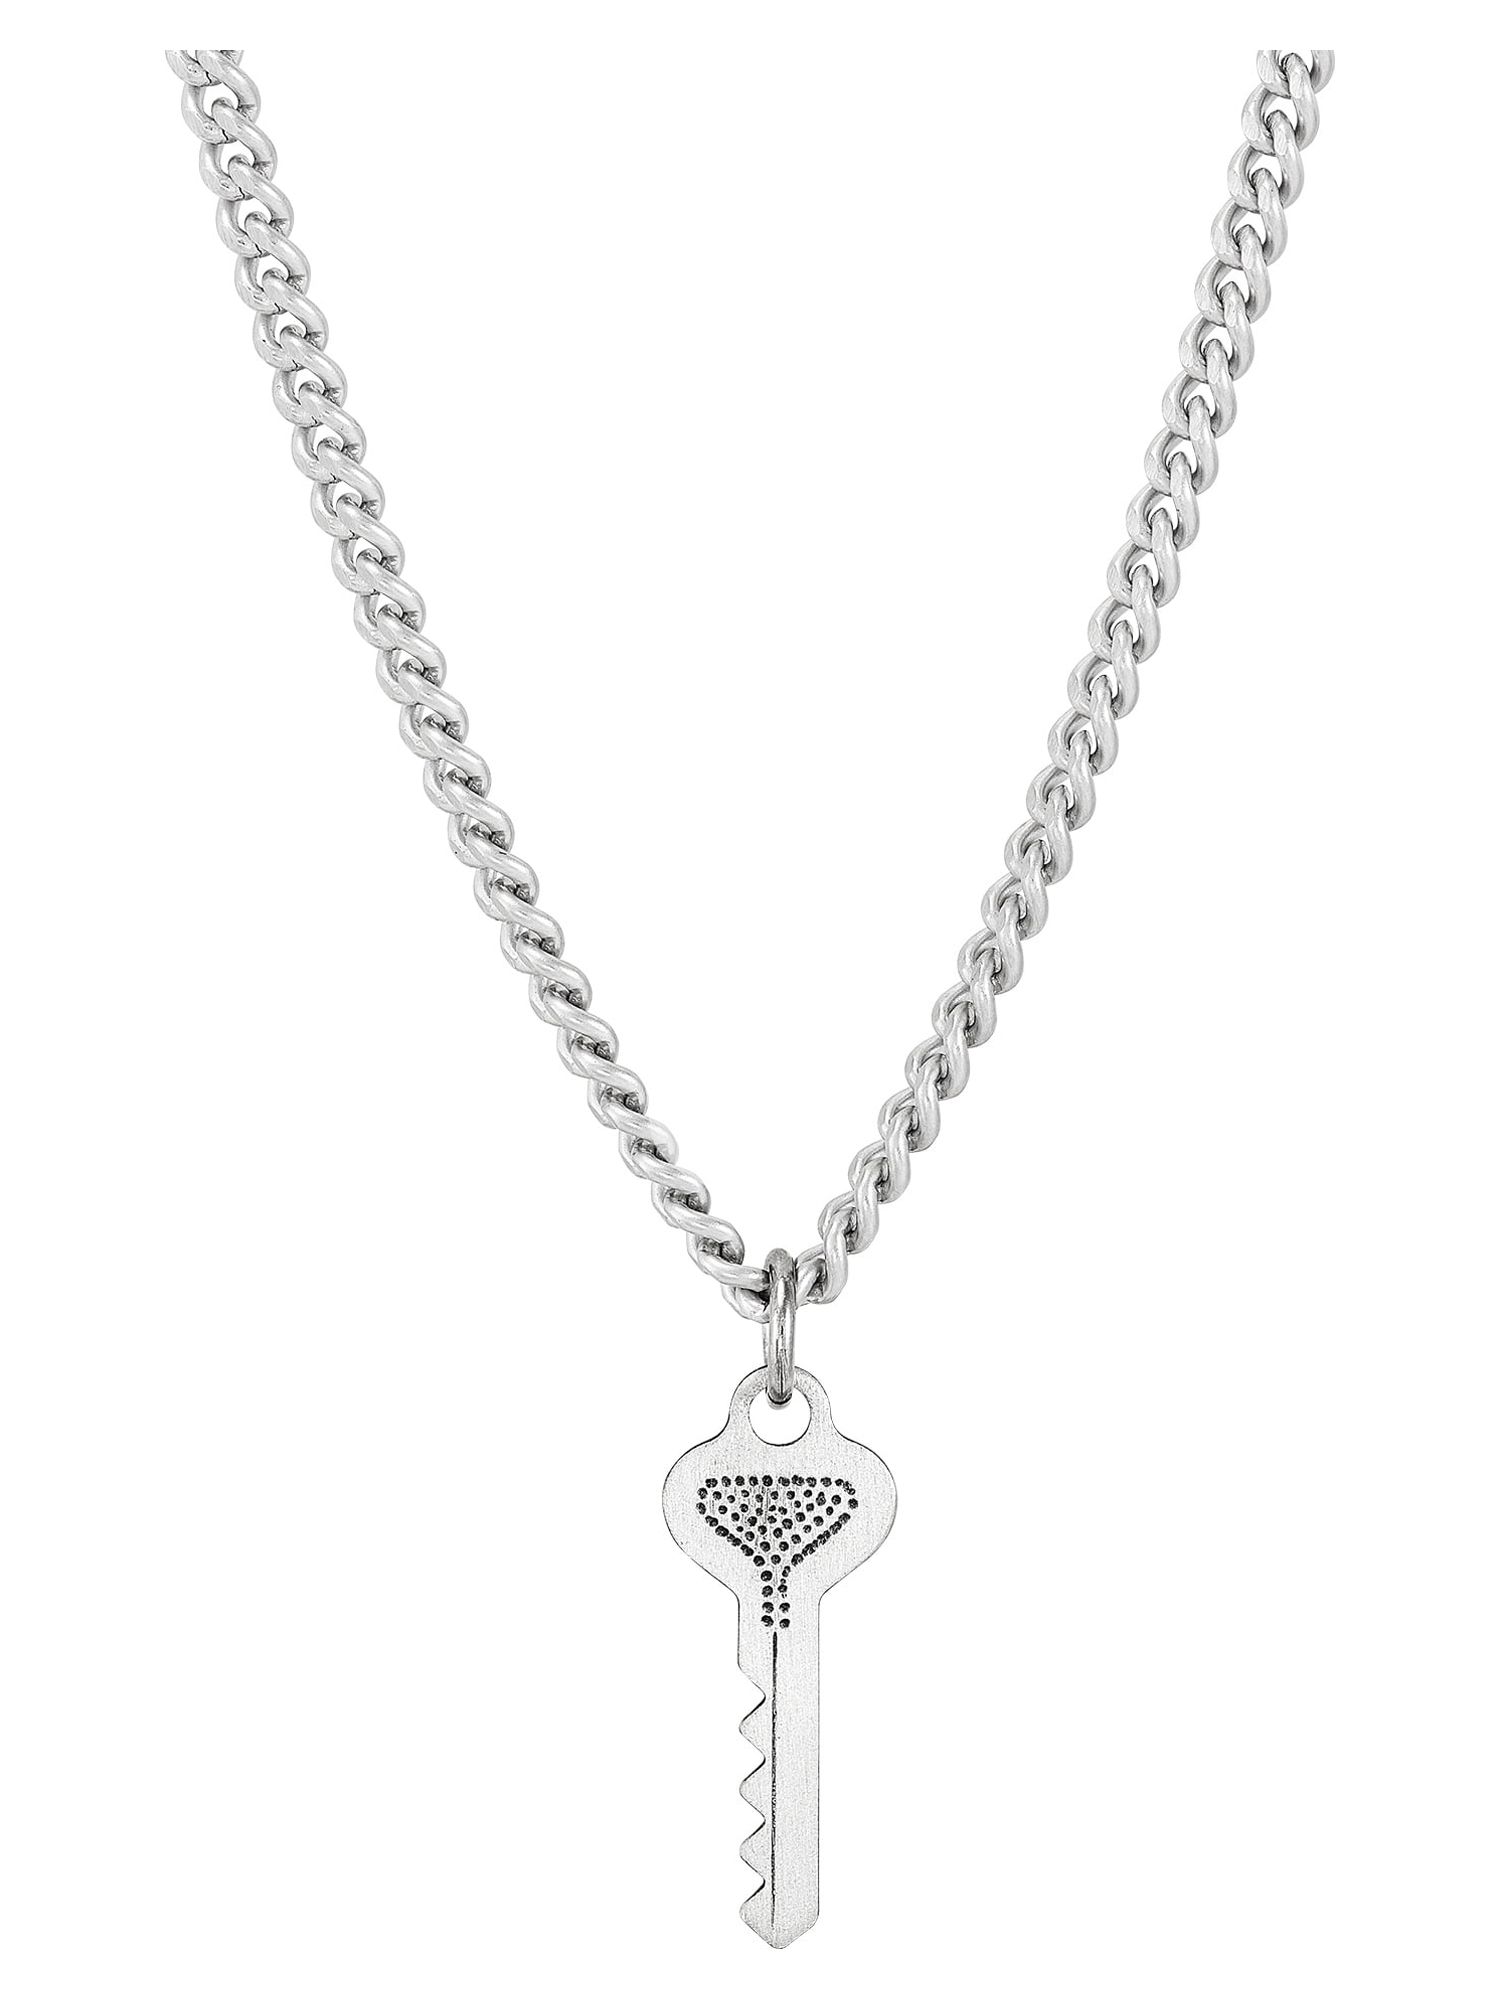 Brilliance Fine Jewelry Sterling Silver Breakable Heart Key Pendant Necklace Set,18" - image 5 of 11